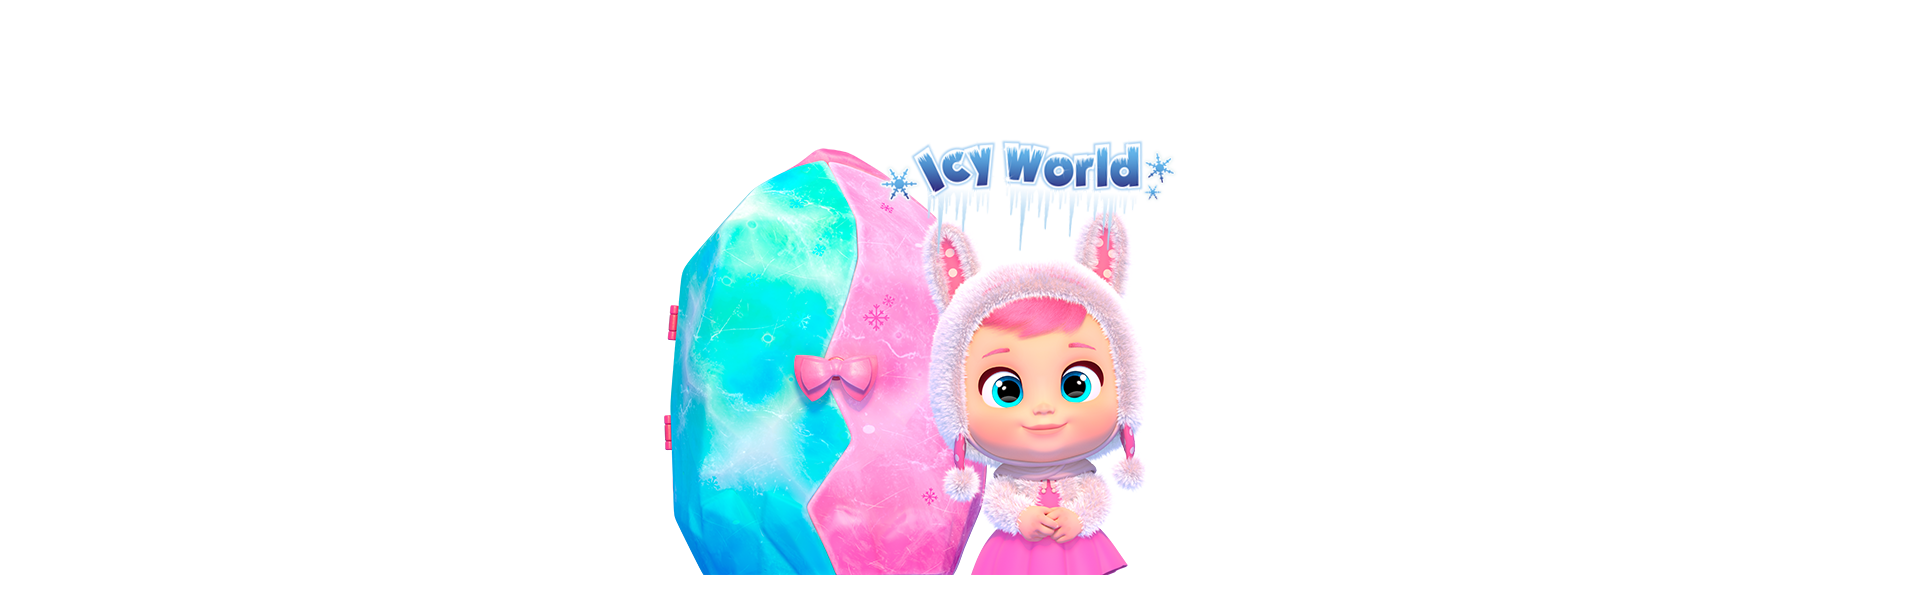 Cry Babies Magic Tears Icy World Keep Me Warm Doll, Collect All 12. Ages 3+